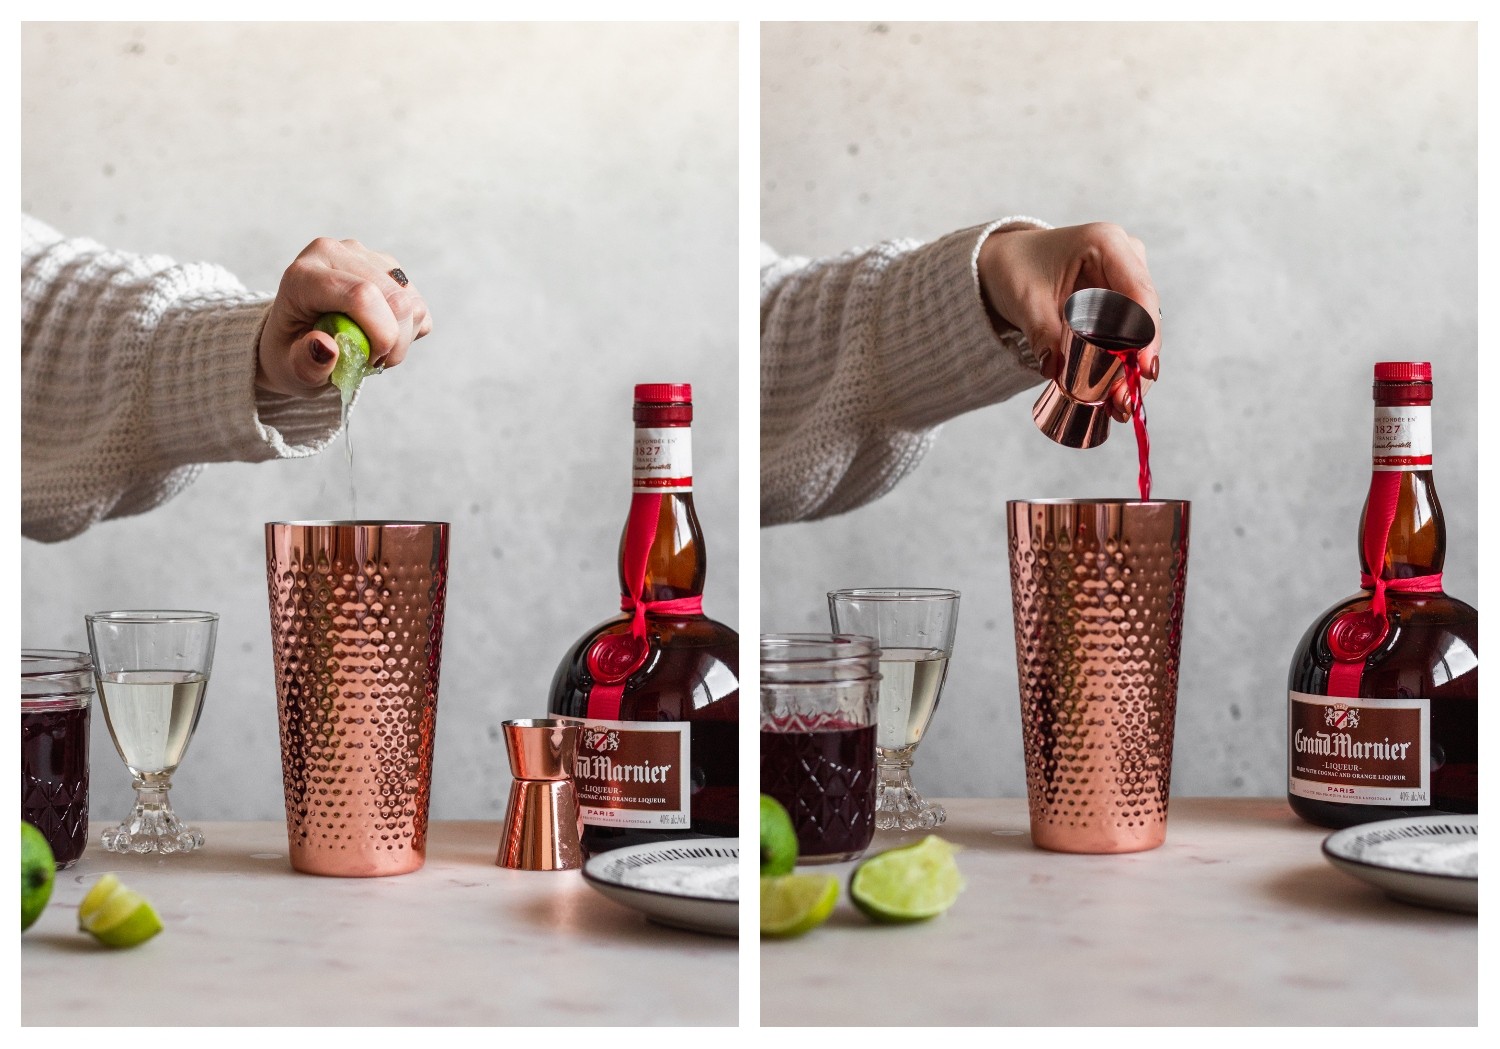 Two images; on the left, a woman's hand is squeezing a lime into a copper cocktail shaker. On the right, the woman is pouring a shot of cranberry juice into the cocktail shaker.